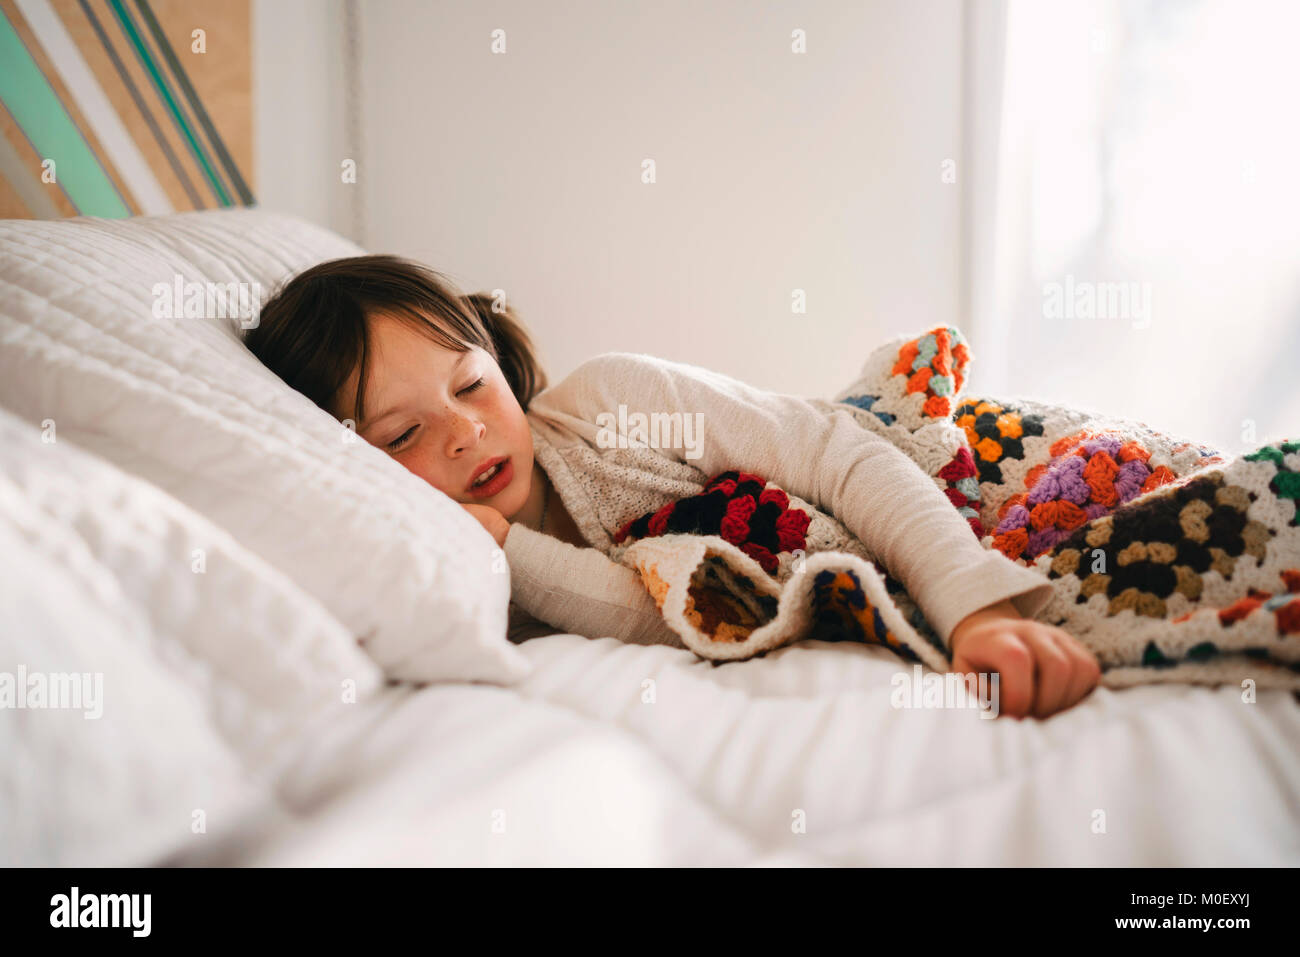 Girl lying in bed having an afternoon nap Stock Photo